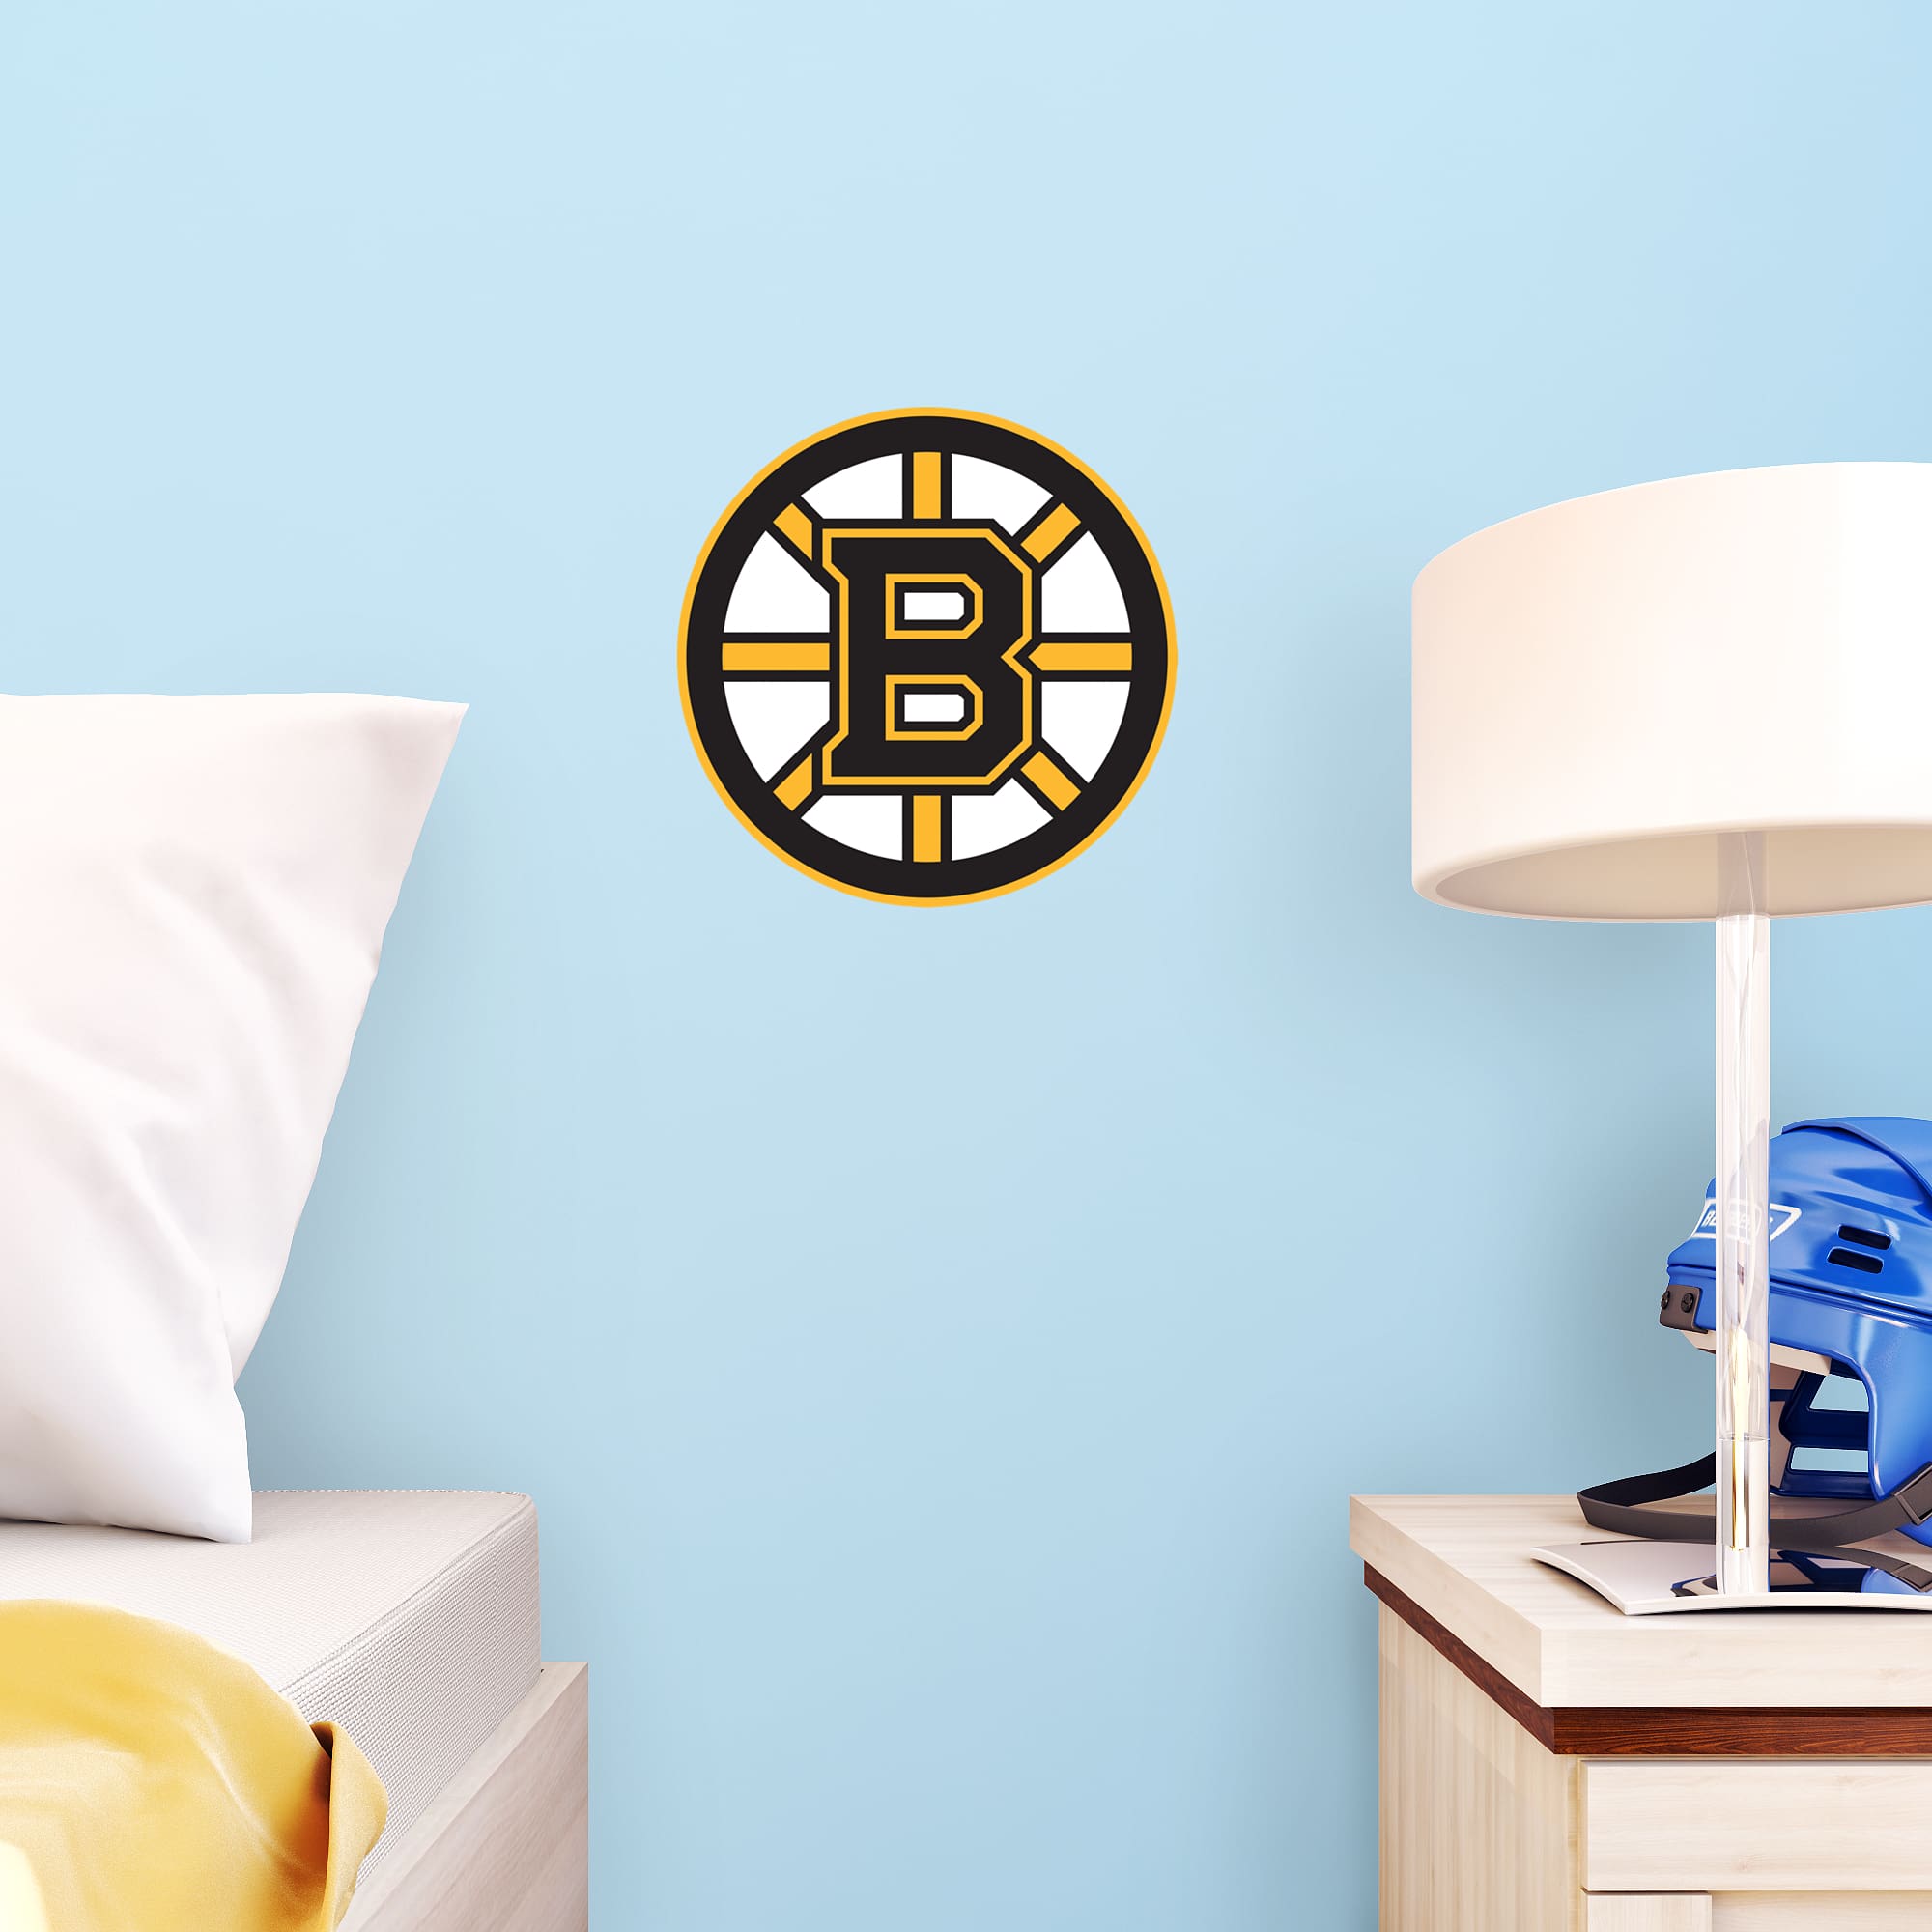 Boston Bruins: Logo - Officially Licensed NHL Removable Wall Decal Large by Fathead | Vinyl